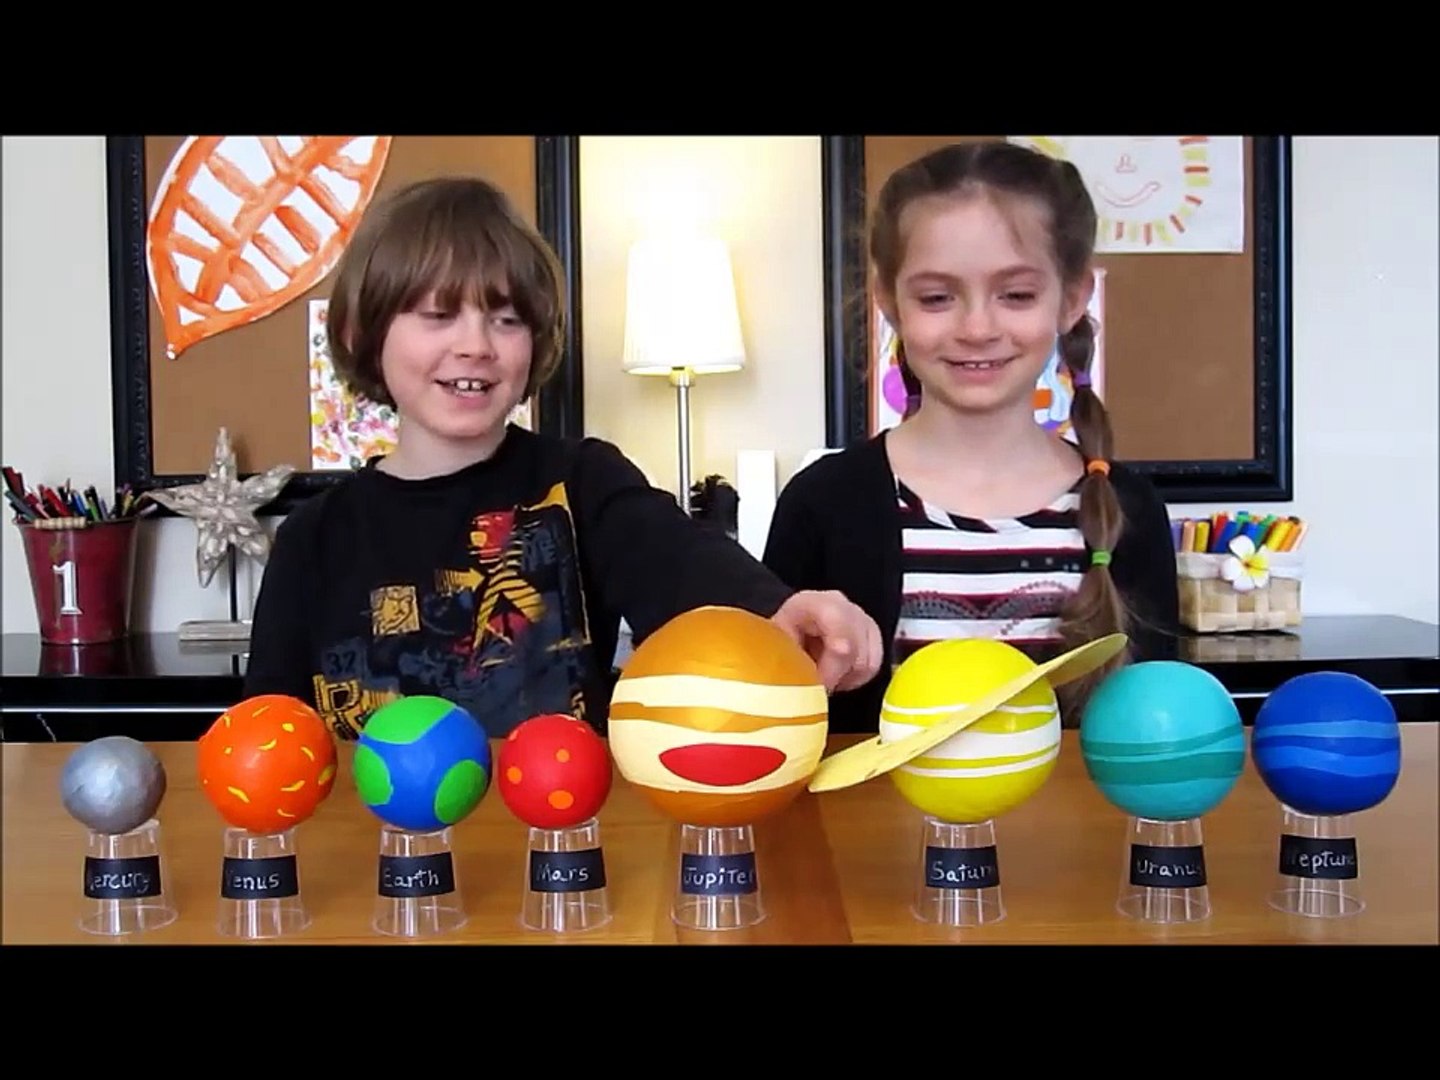 Planets In Our Solar System Diy Science Project For Kids Easy To Do Solar System Model Video Dailymotion